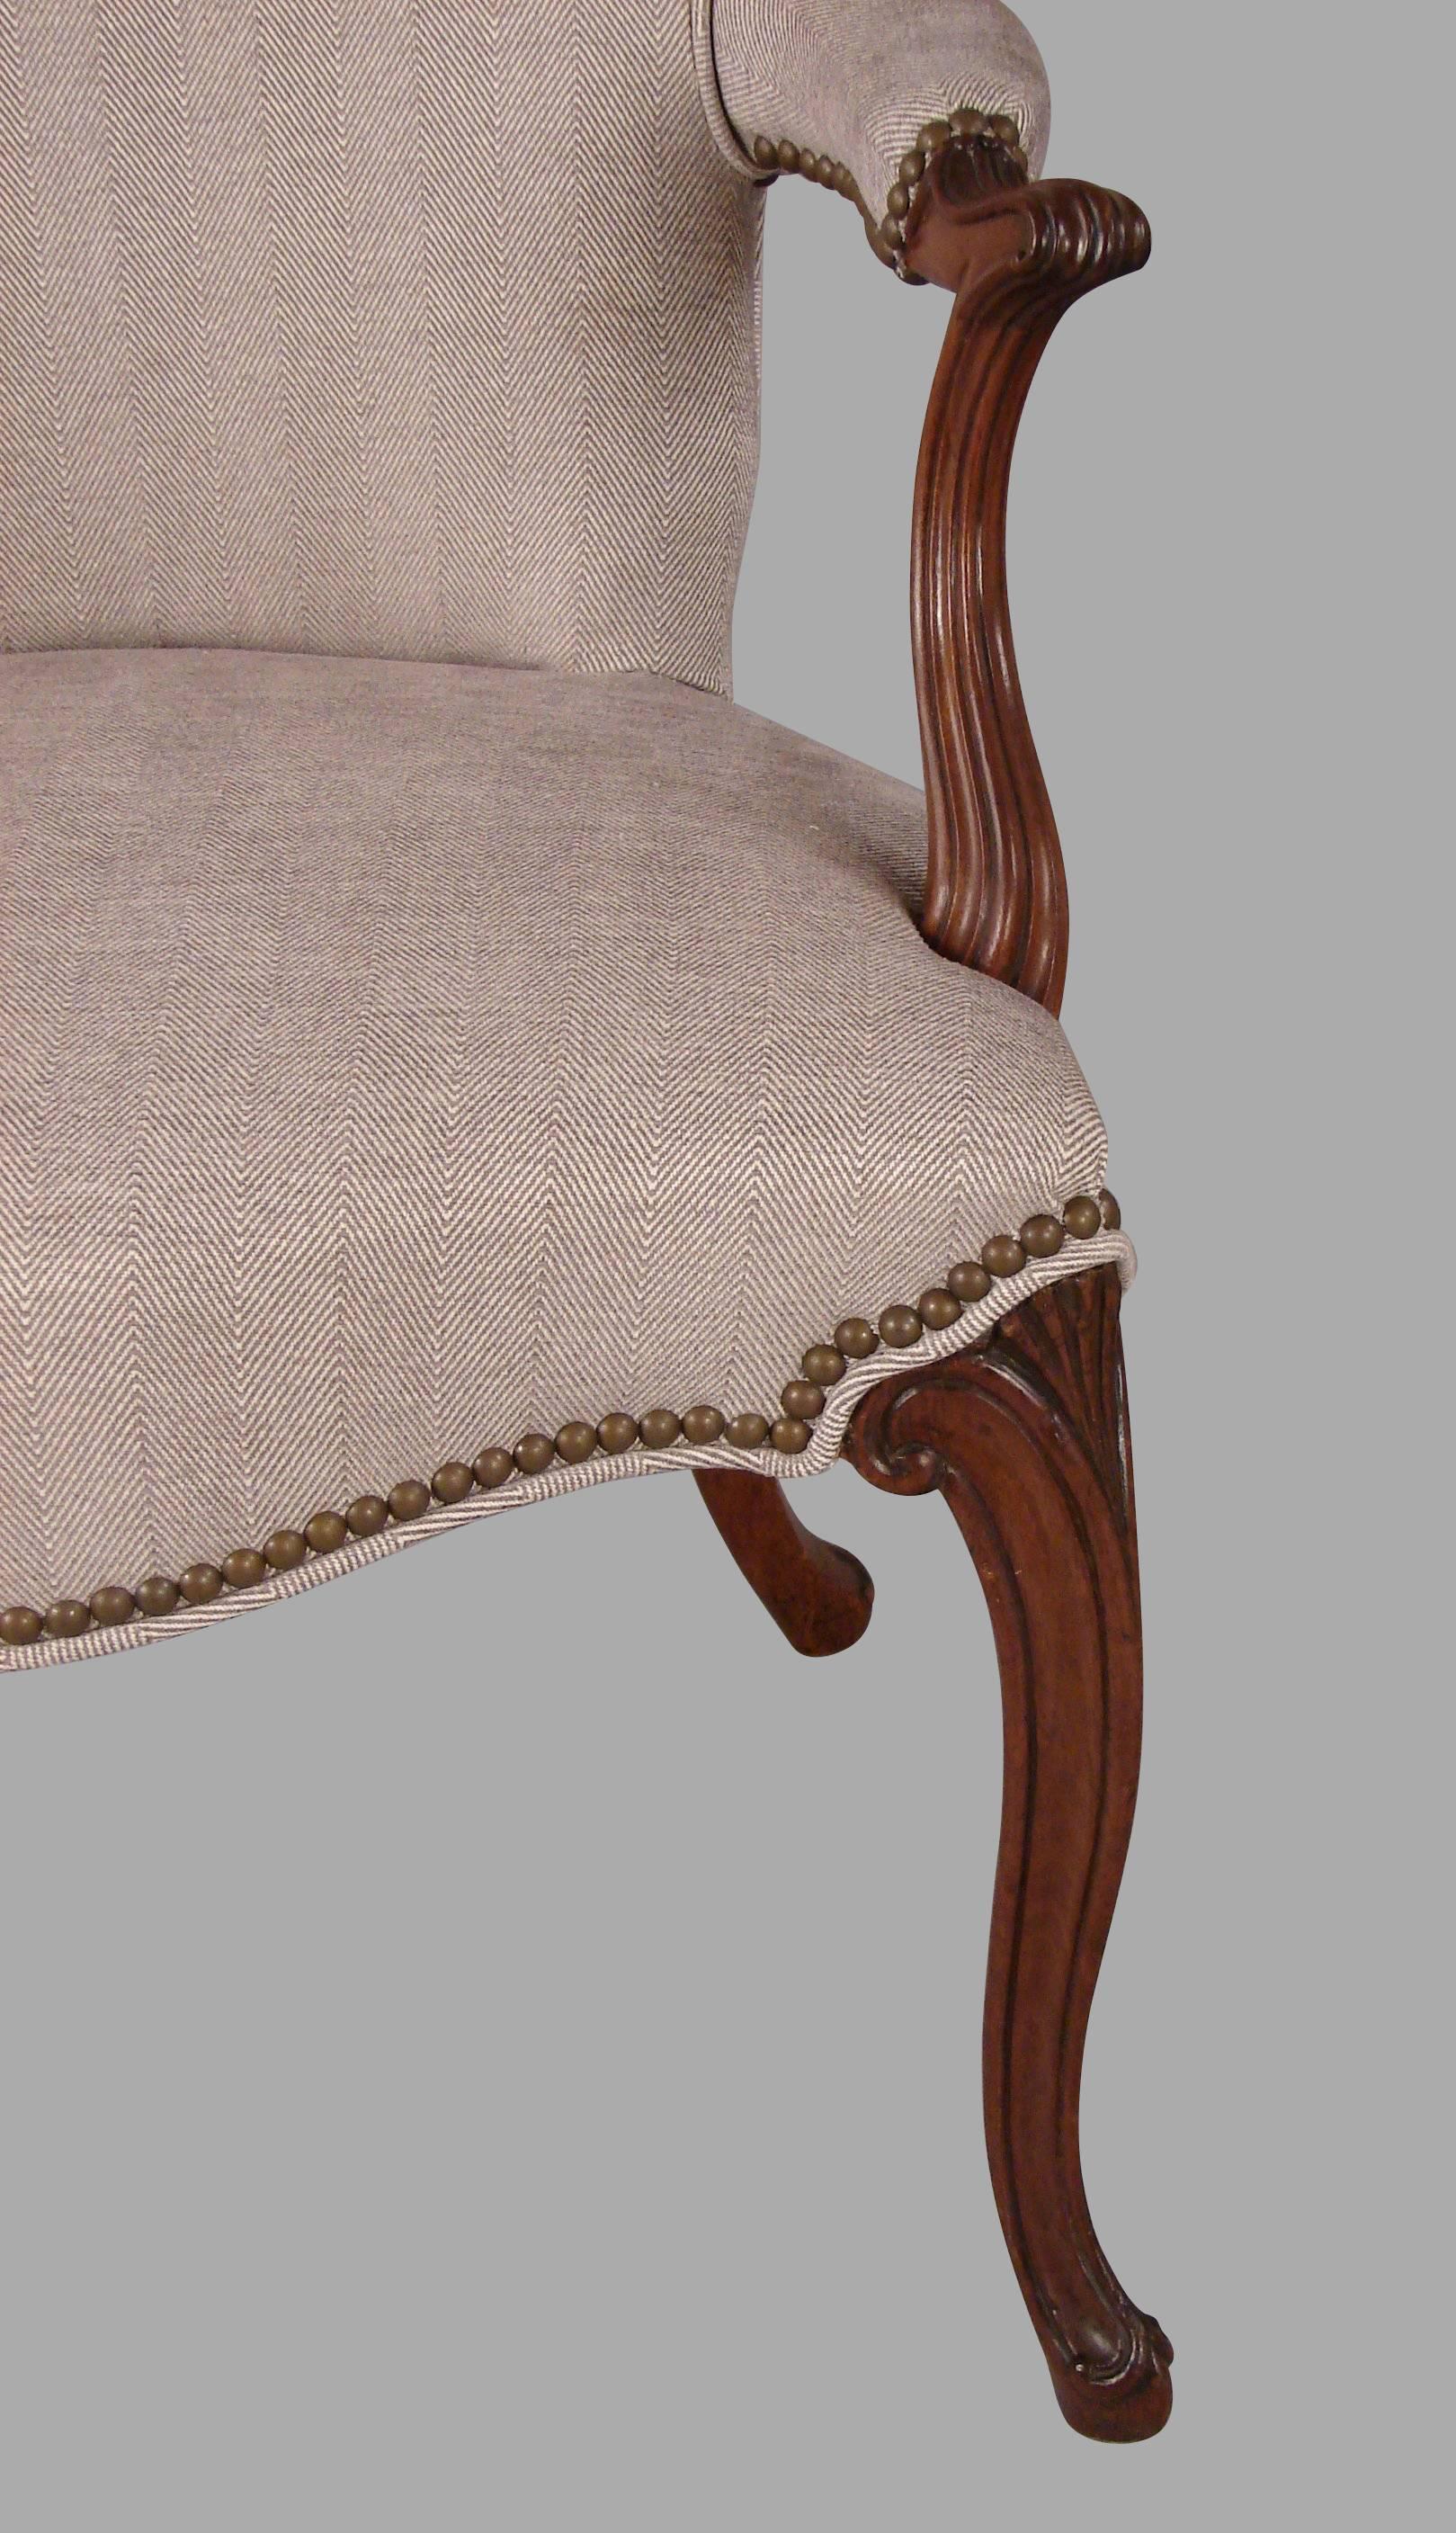 A near pair of English mahogany Hepplewhite style armchairs in the French taste, each with fluted and tapered arms and cabriole legs. Newly upholstered in a contemporary herringbone fabric with nailhead trim.